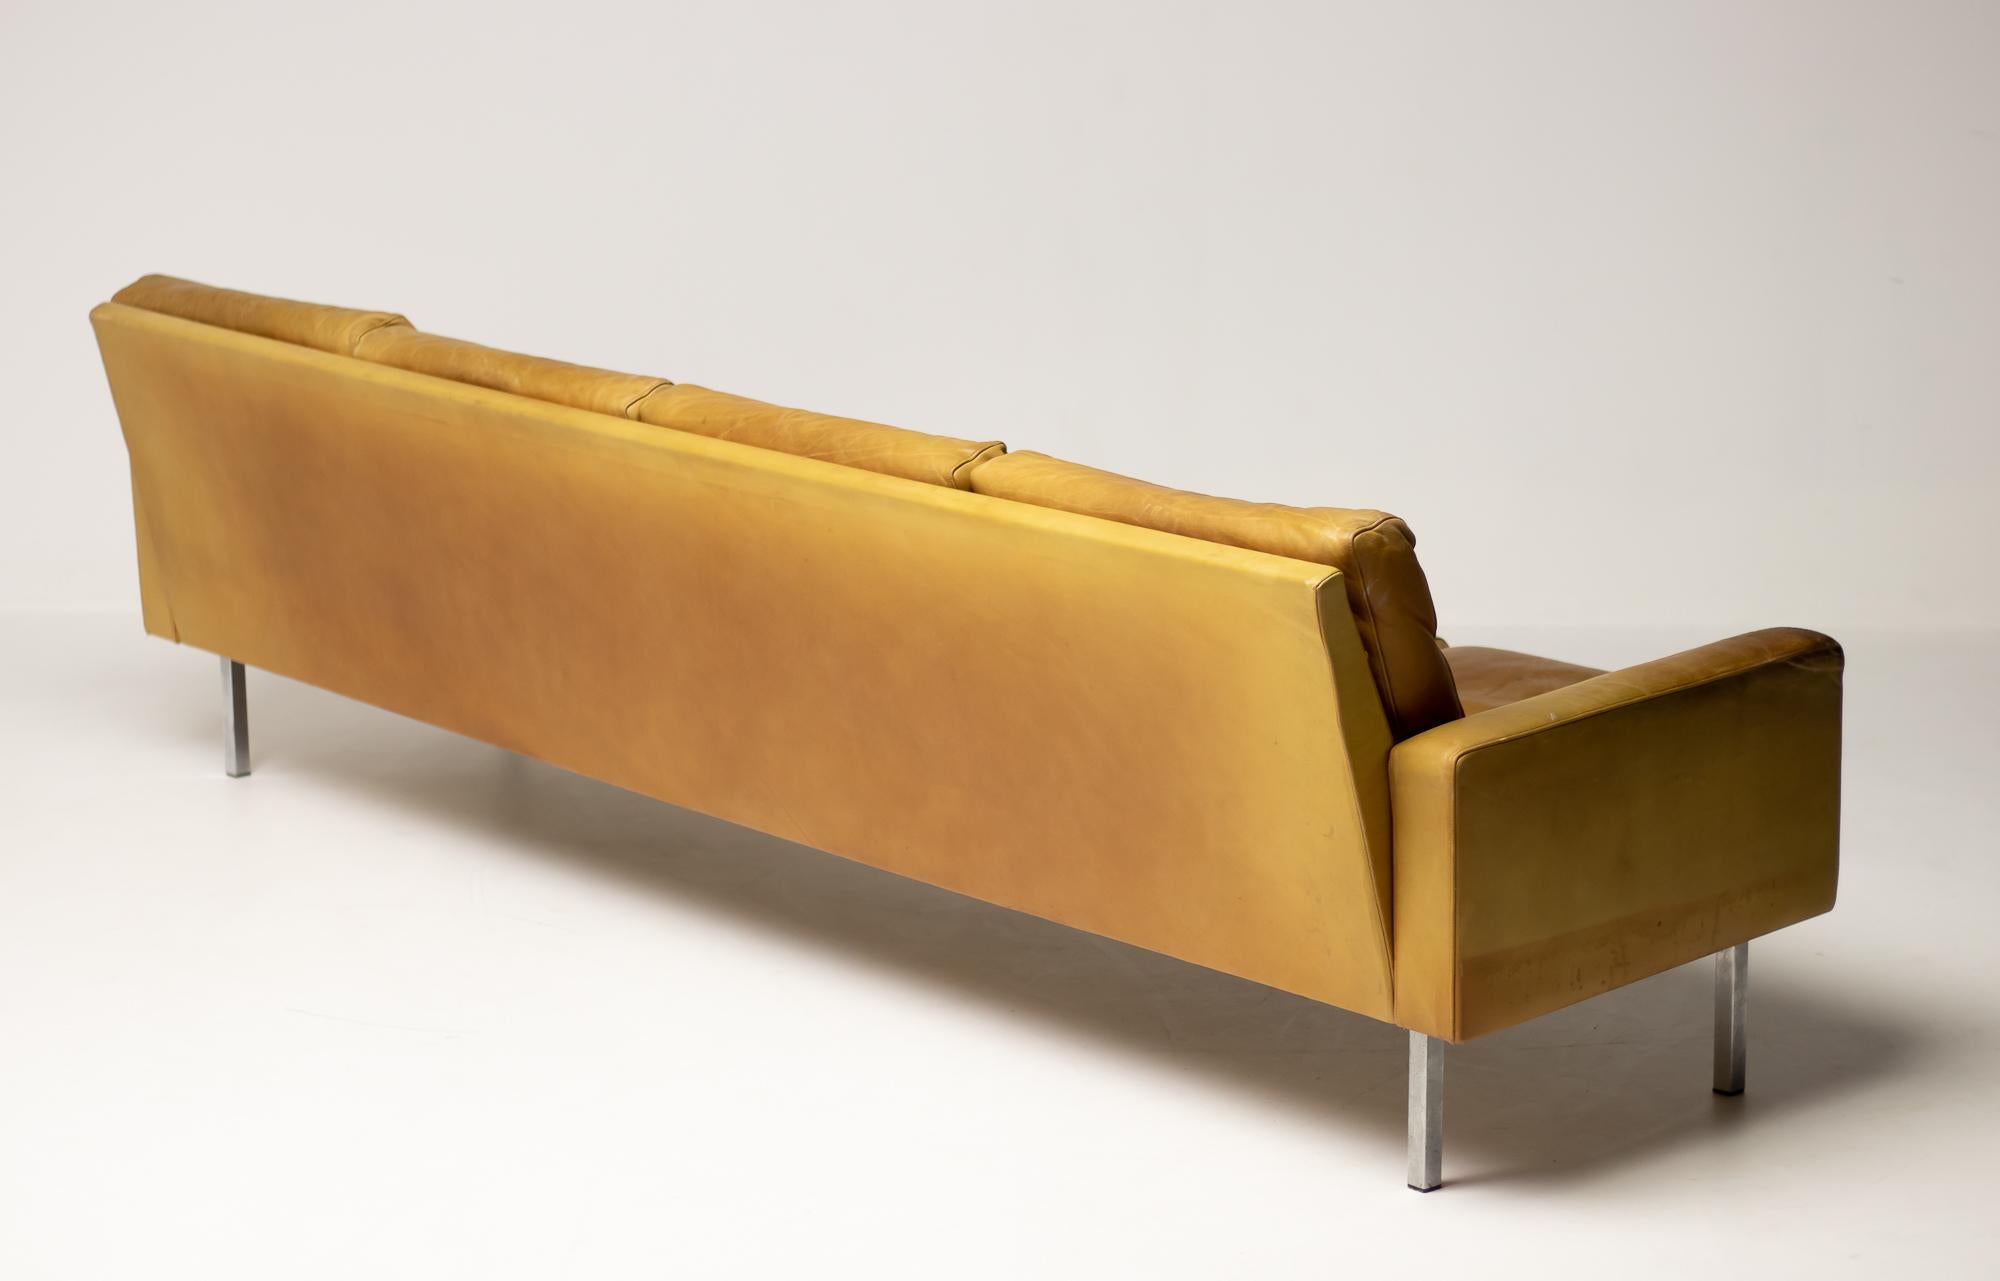 Very rare Martin Visser four-seat sofa BZ55 designed in 1968 for 't Spectrum.
Pictured in the catalogue raisonné, most likely the only one ever produced.
The original natural leather is in nice vintage condition.
The arms have some age related